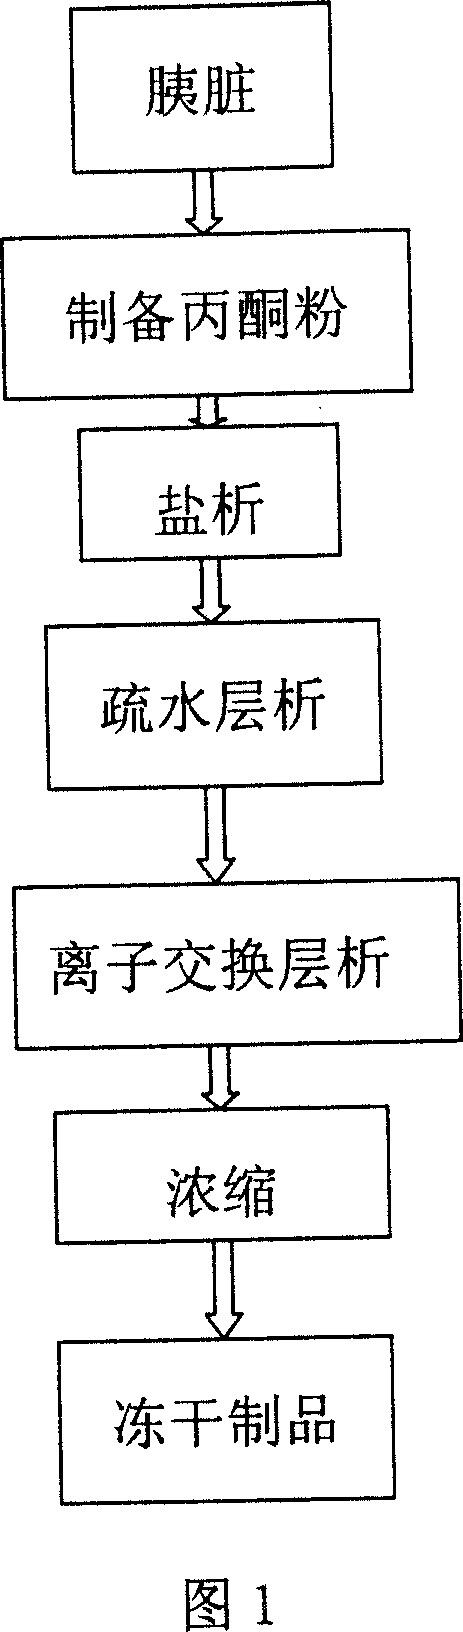 Preparation method of protaminase B and its composition